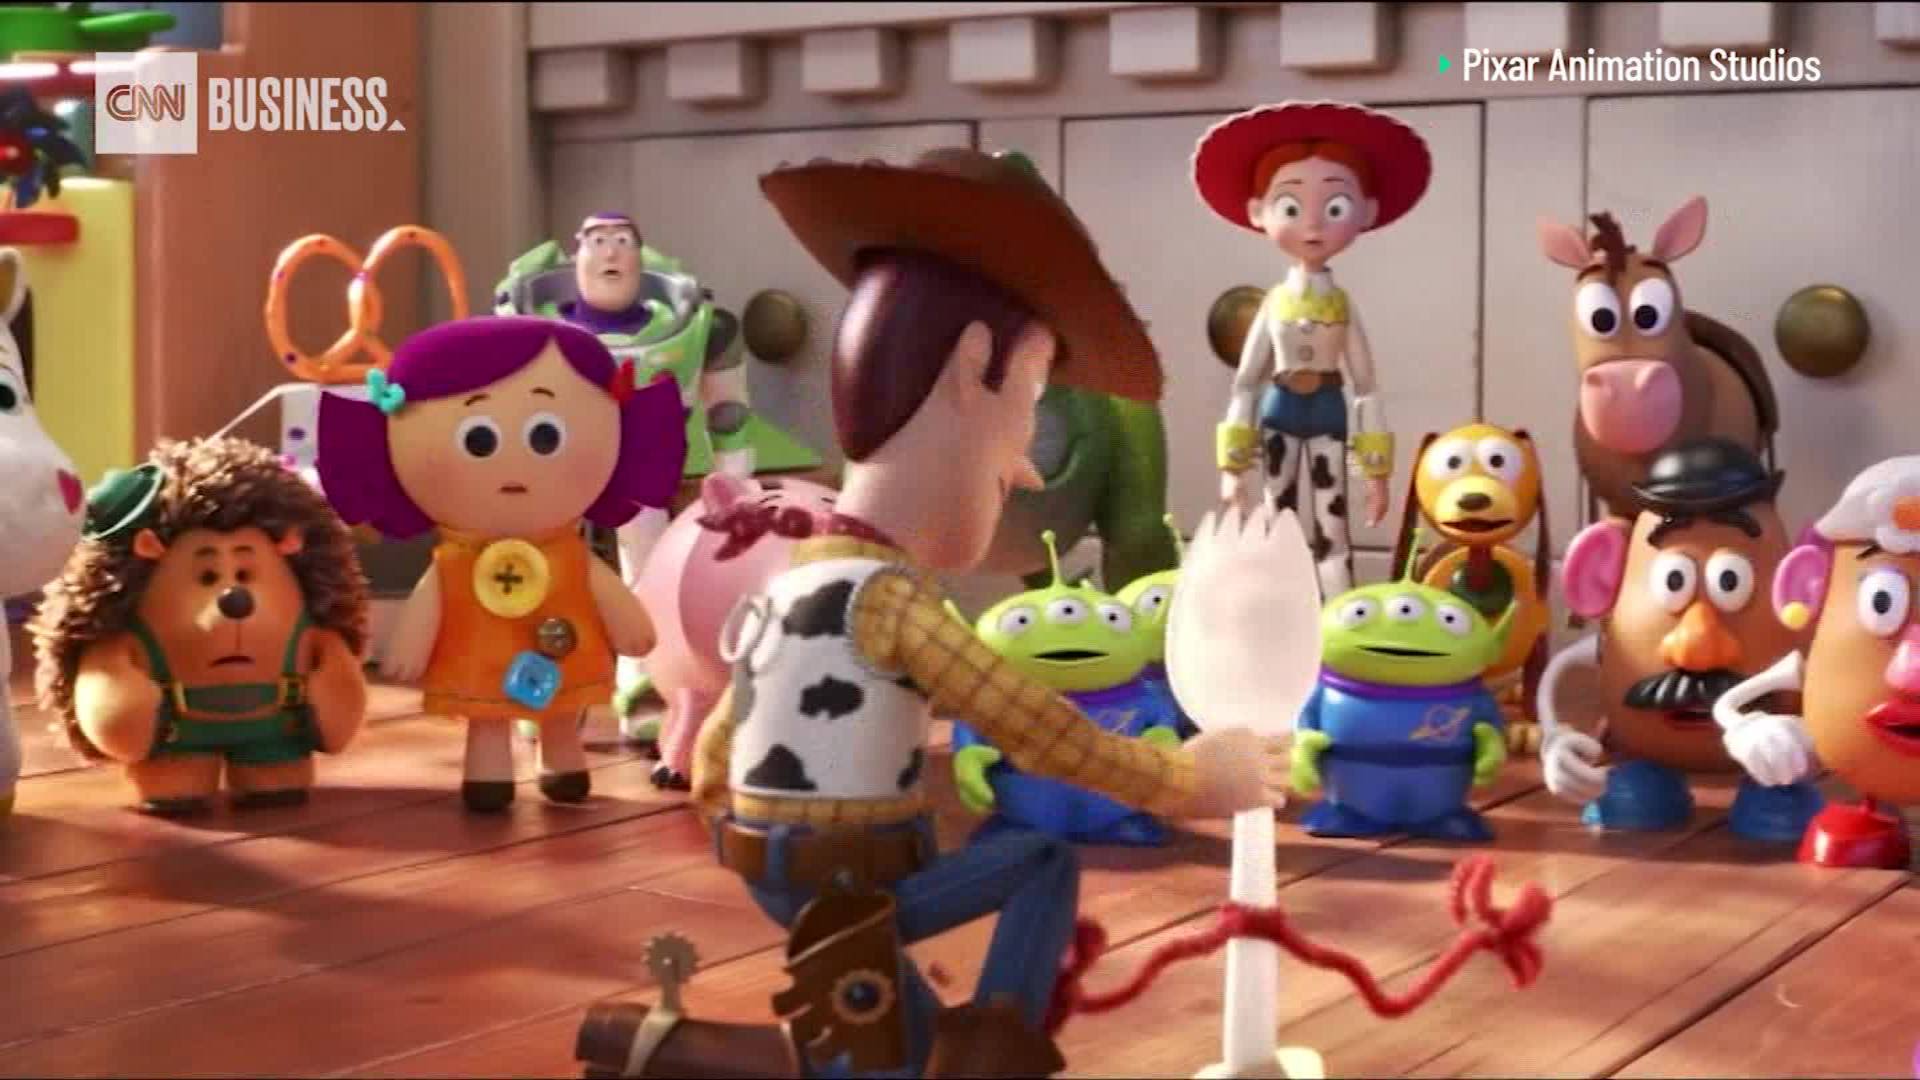 Toy Story 4 review: a gorgeous tale about the beauty in saying goodbye - Vox